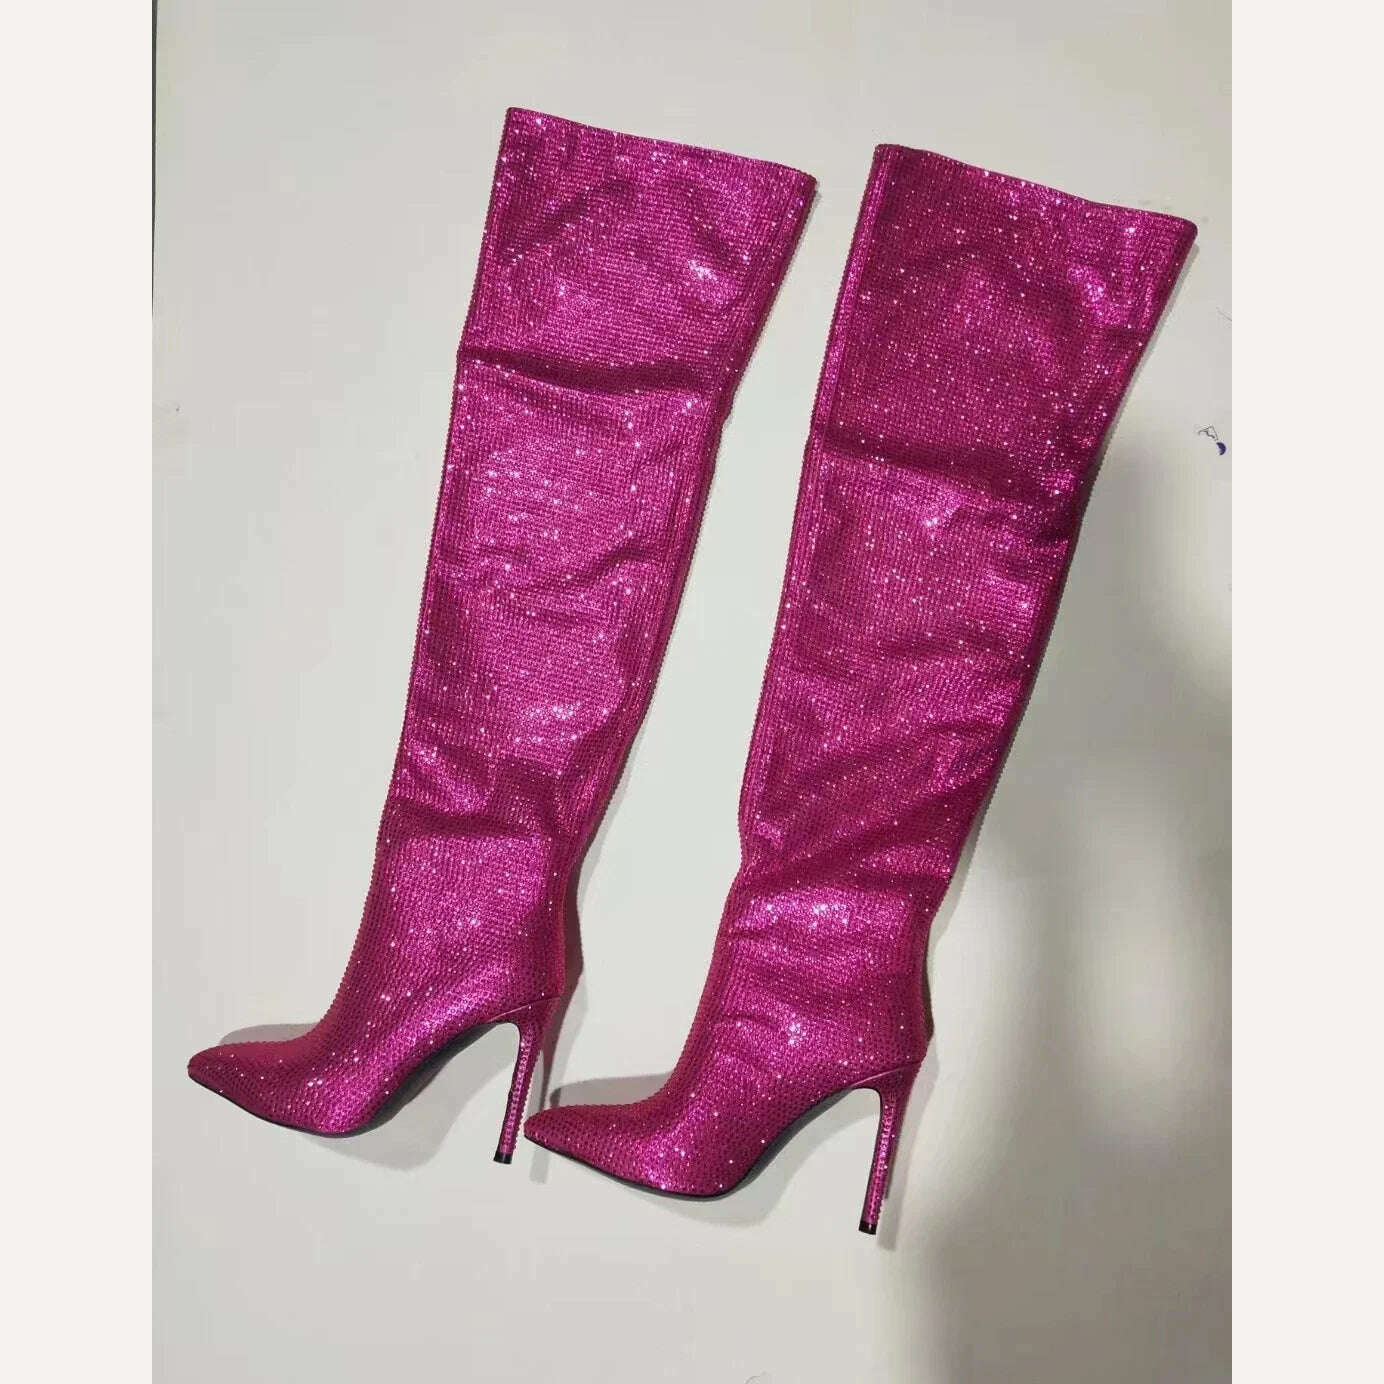 2023 Autumn New Fashion Bling Silver Crystal Over The Knee Boots for Women Sexy Luxury Designer Rhinestone Banquet Shoes 42 43, Rose 6187    8.5cm / 34, KIMLUD Women's Clothes